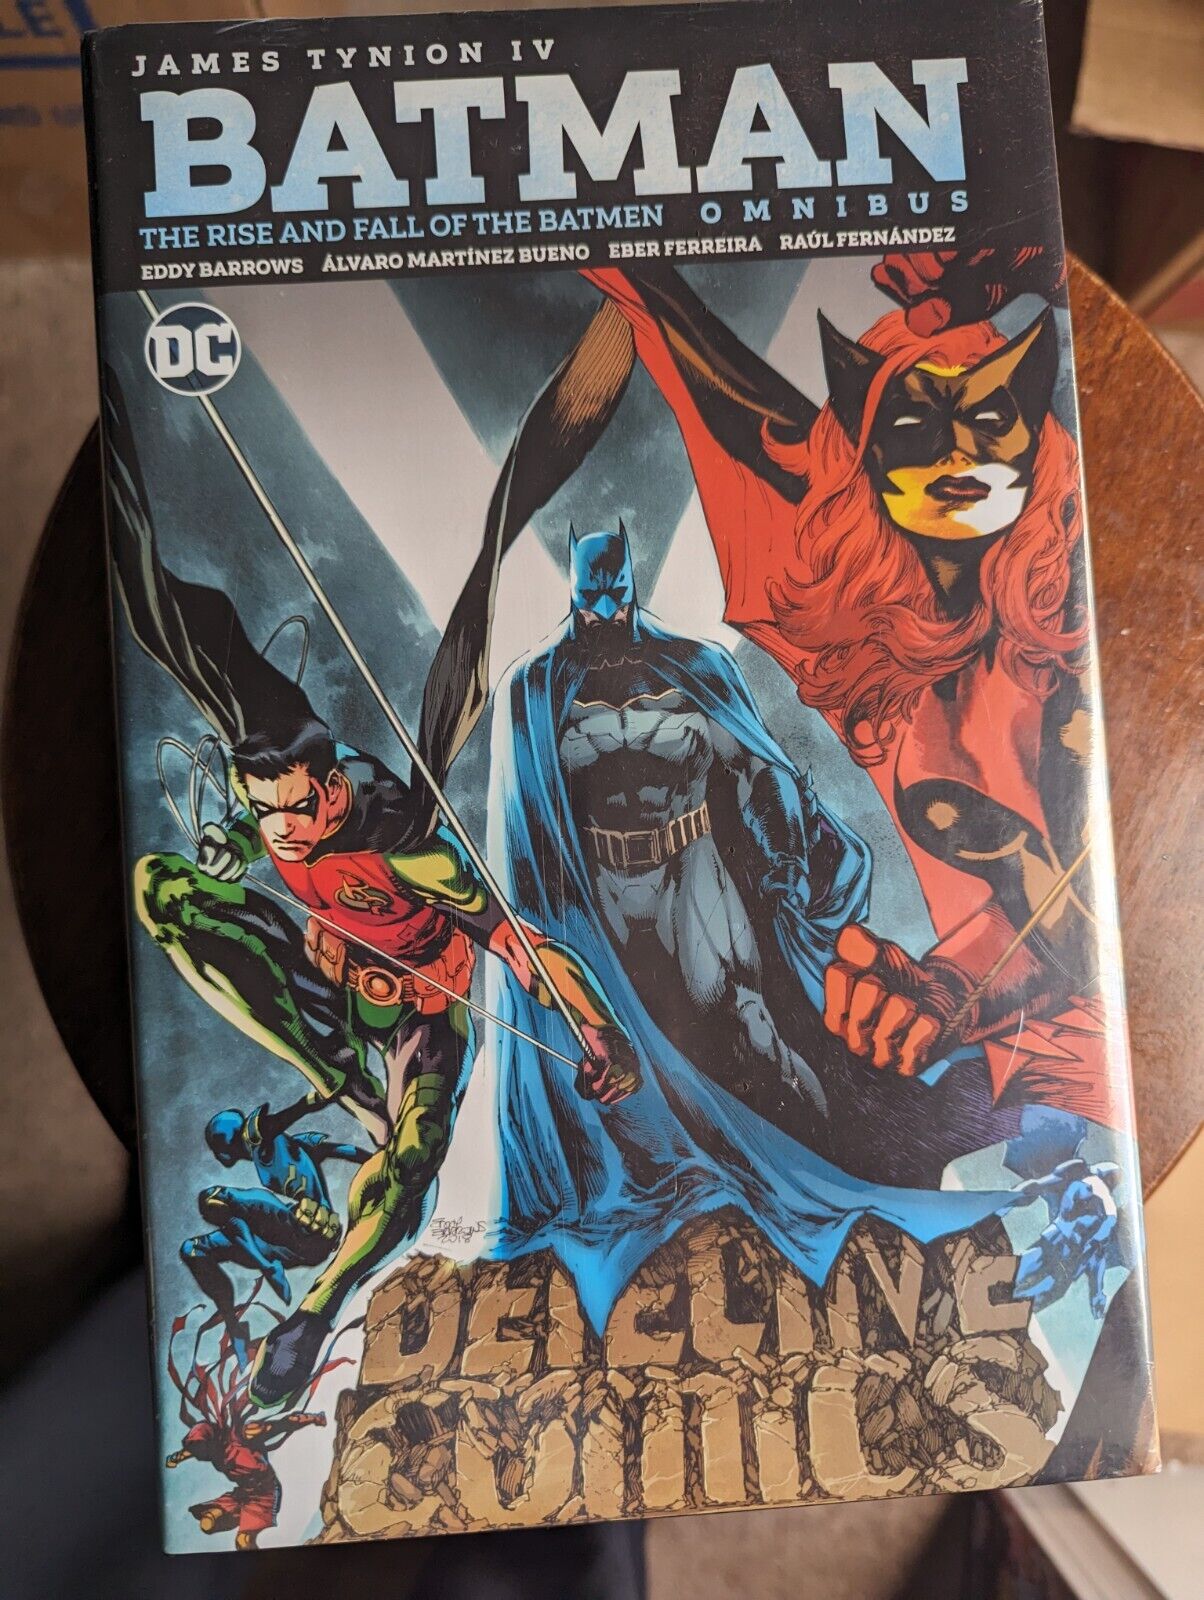 Batman: The Rise and Fall of the Batmen Omnibus [Hardcover] Tynion IV, James